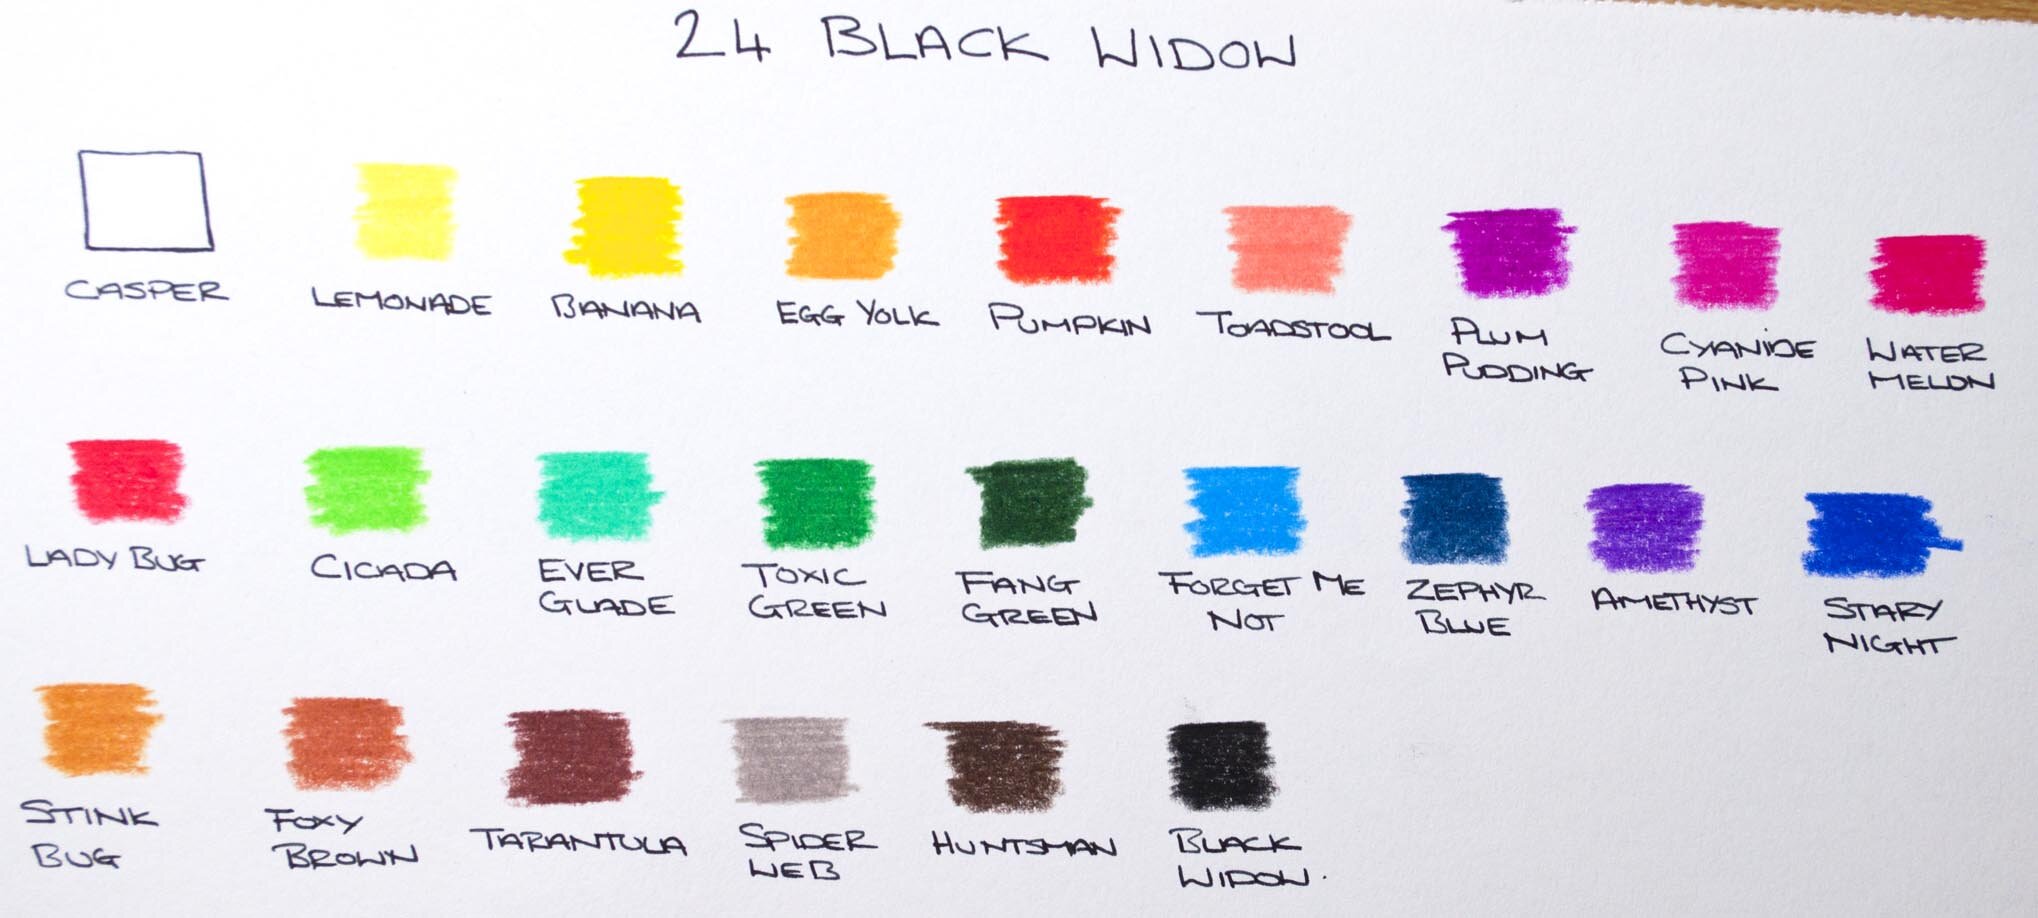 Black Widow MONARCH & DRAGON Colored Pencils First Impressions Review